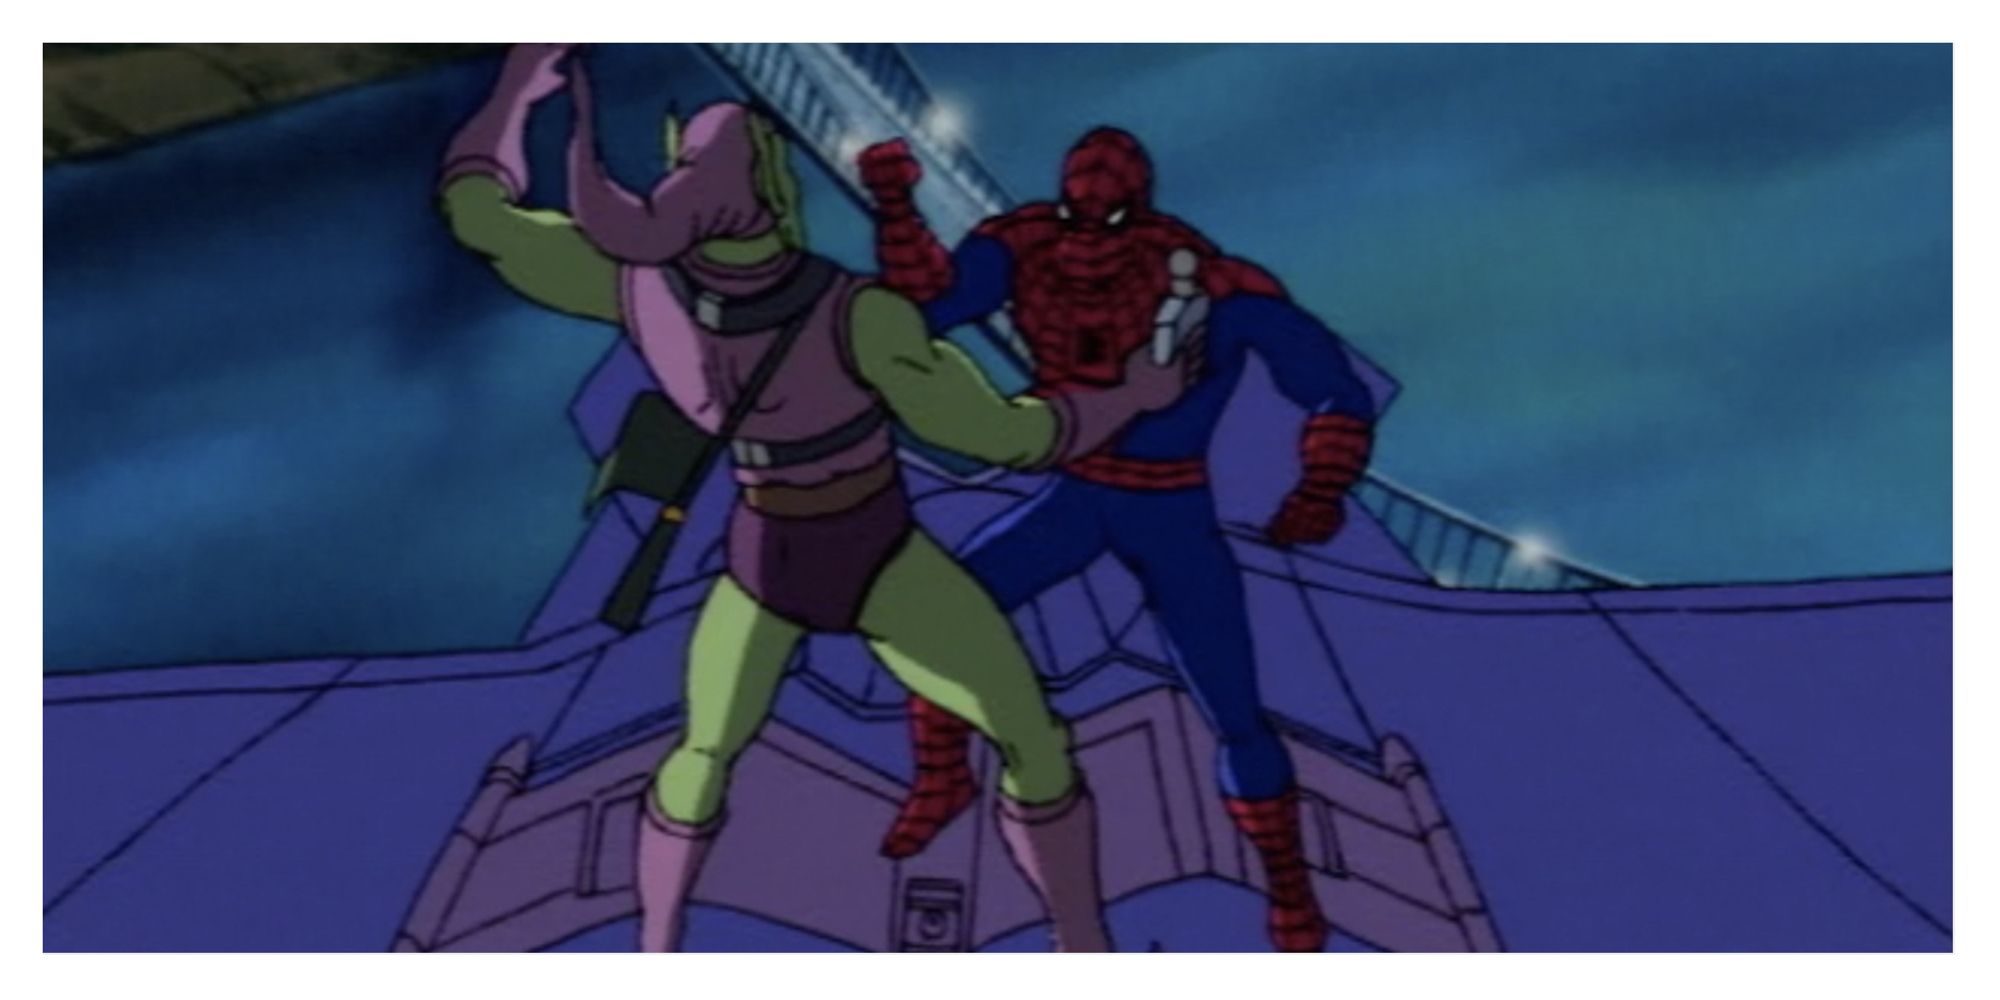 Spider-Man and Green Goblin trade punches